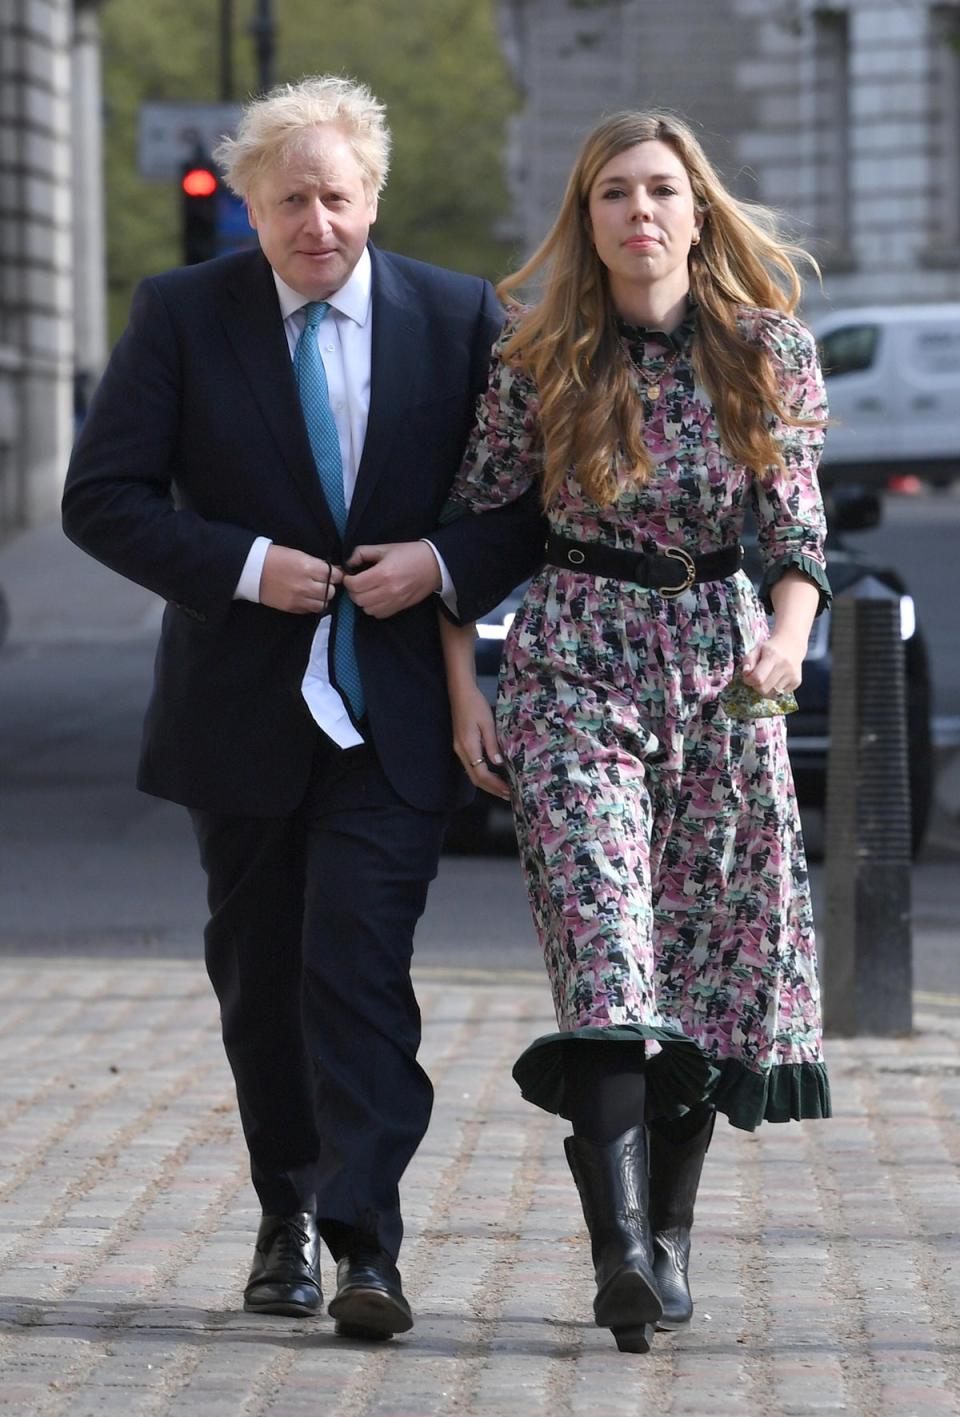 Boris Johnson with his now wife Carrie Symonds (PA)